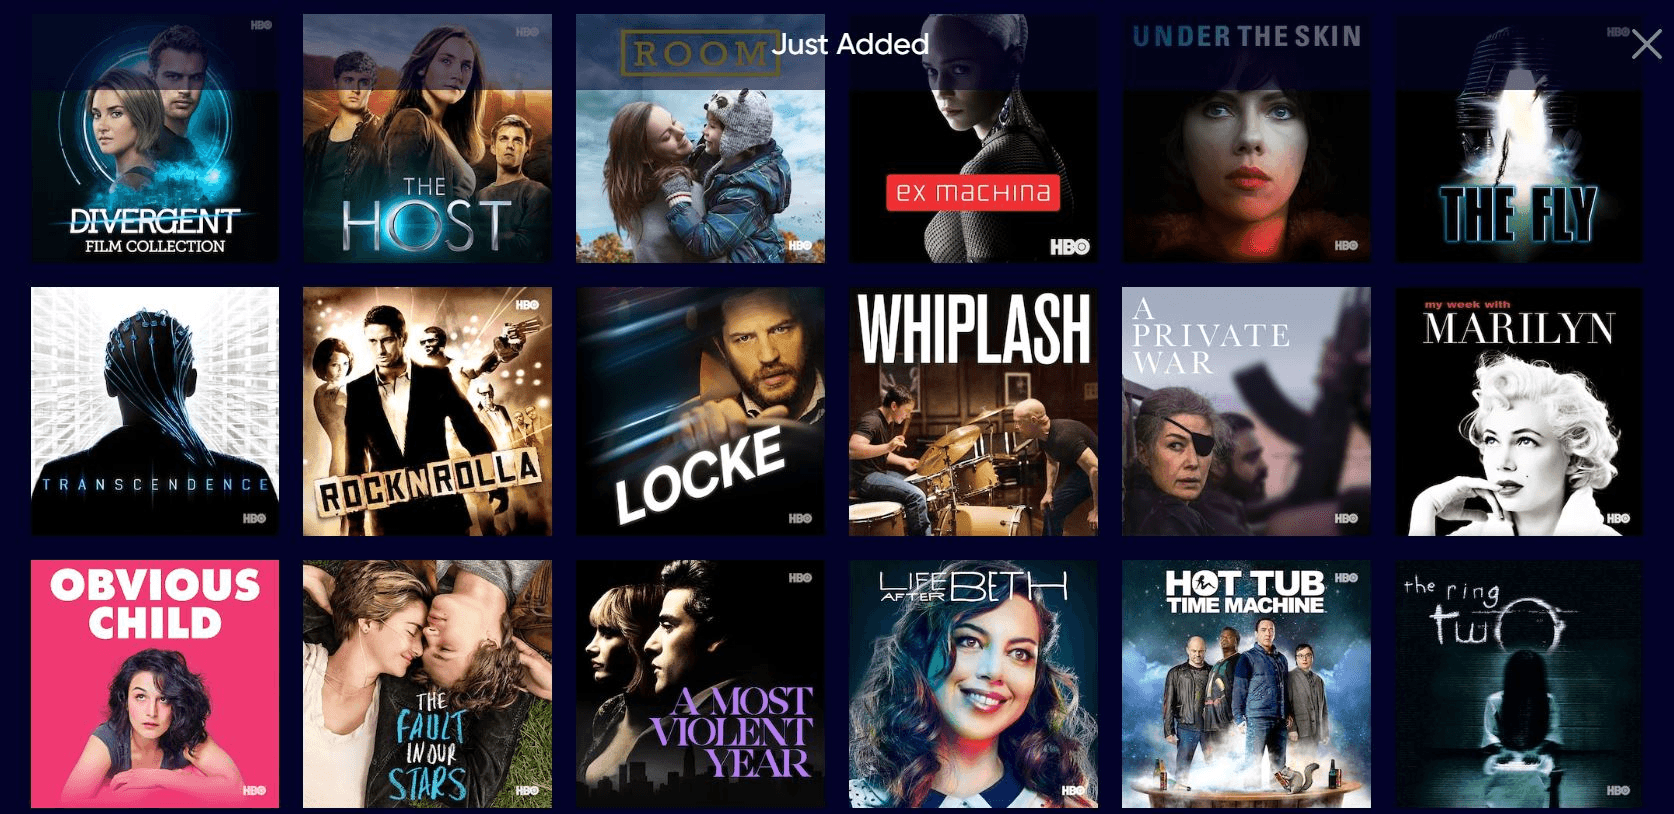 Content that has just been added to HBO Max includes Obvious Child, The Fault in Our Stars, the Divergent film collection, The Host, Transcendence, Rock N Rolla, Locke, Whiplash, Hot Tub Time Machine, The Ring Two, Under the Skin, The Fly and A Most Violent Year. 